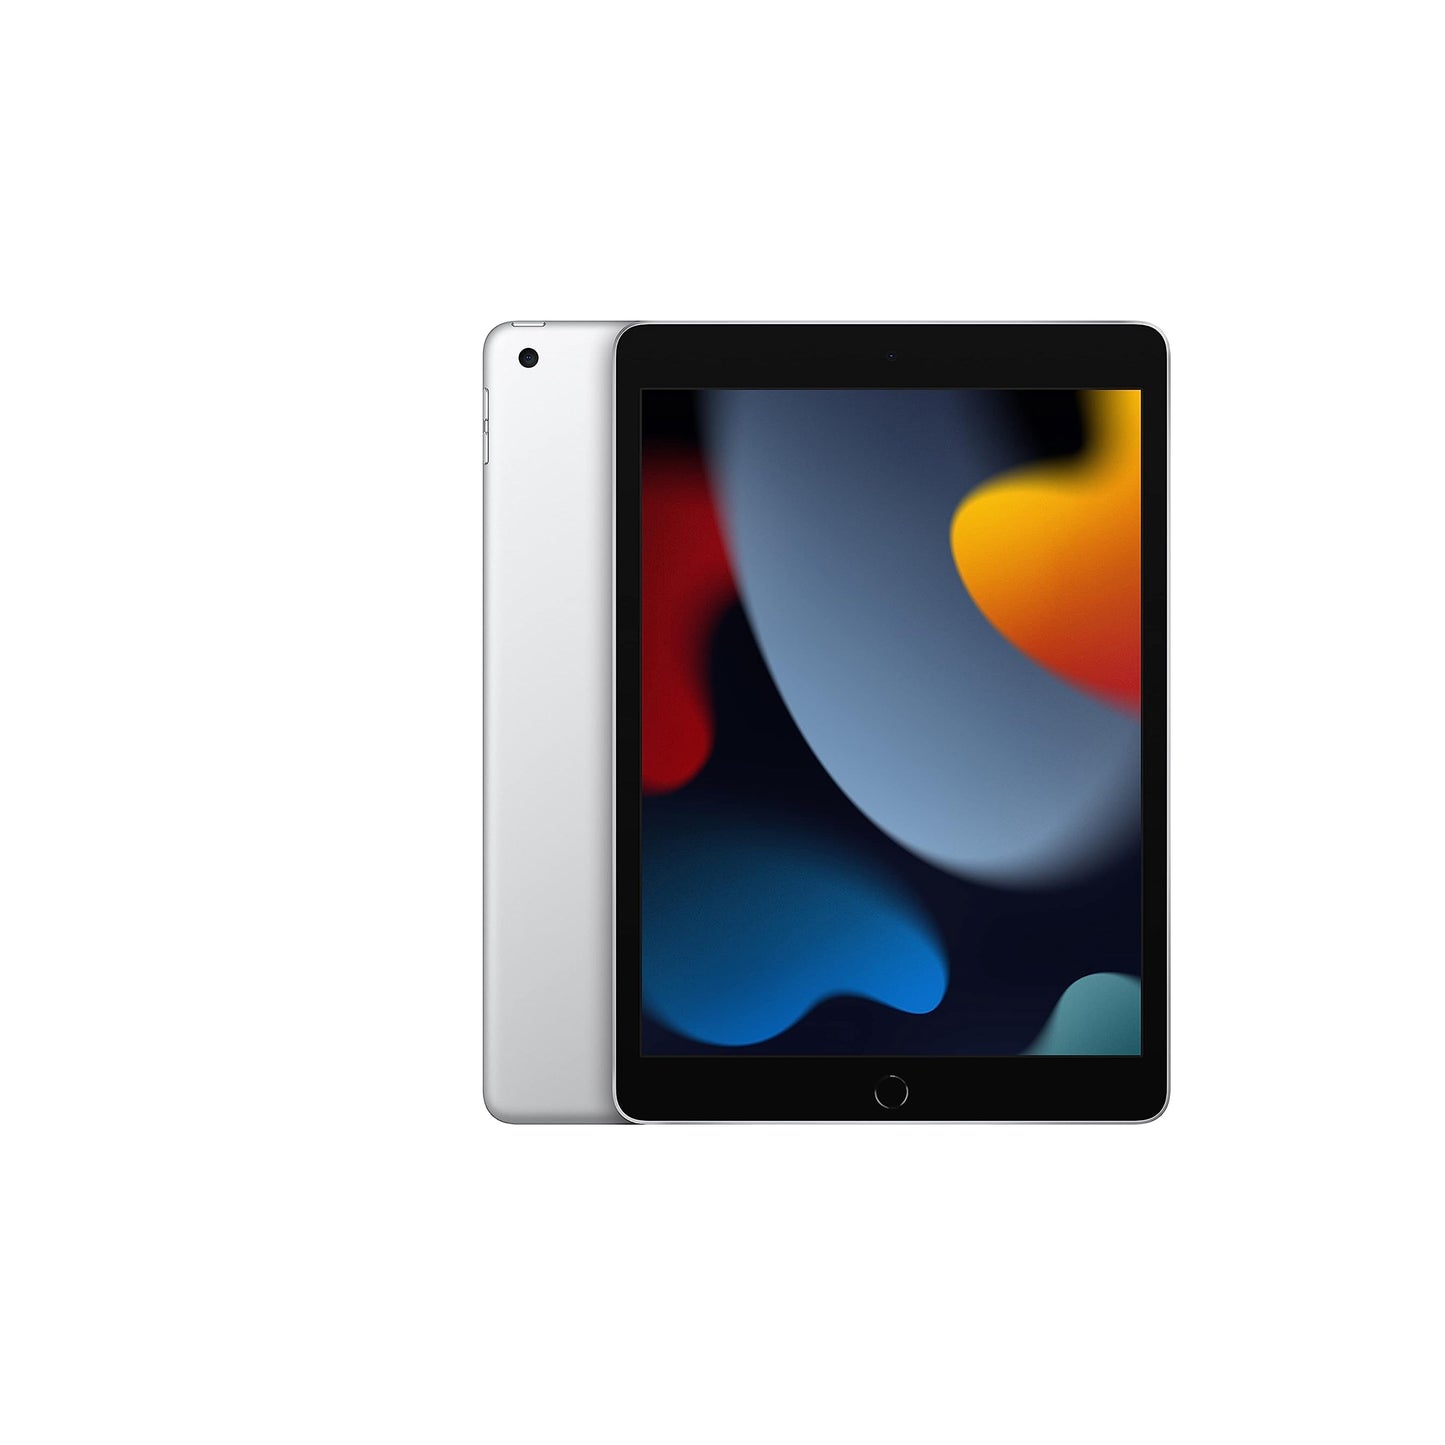 Apple iPad (9th Generation): with A13 Bionic chip, 10.2-inch Retina Display, 256GB, Wi-Fi + 4G LTE Cellular, 12MP front/8MP Back Camera, Touch ID, All-Day Battery Life – Space Gray